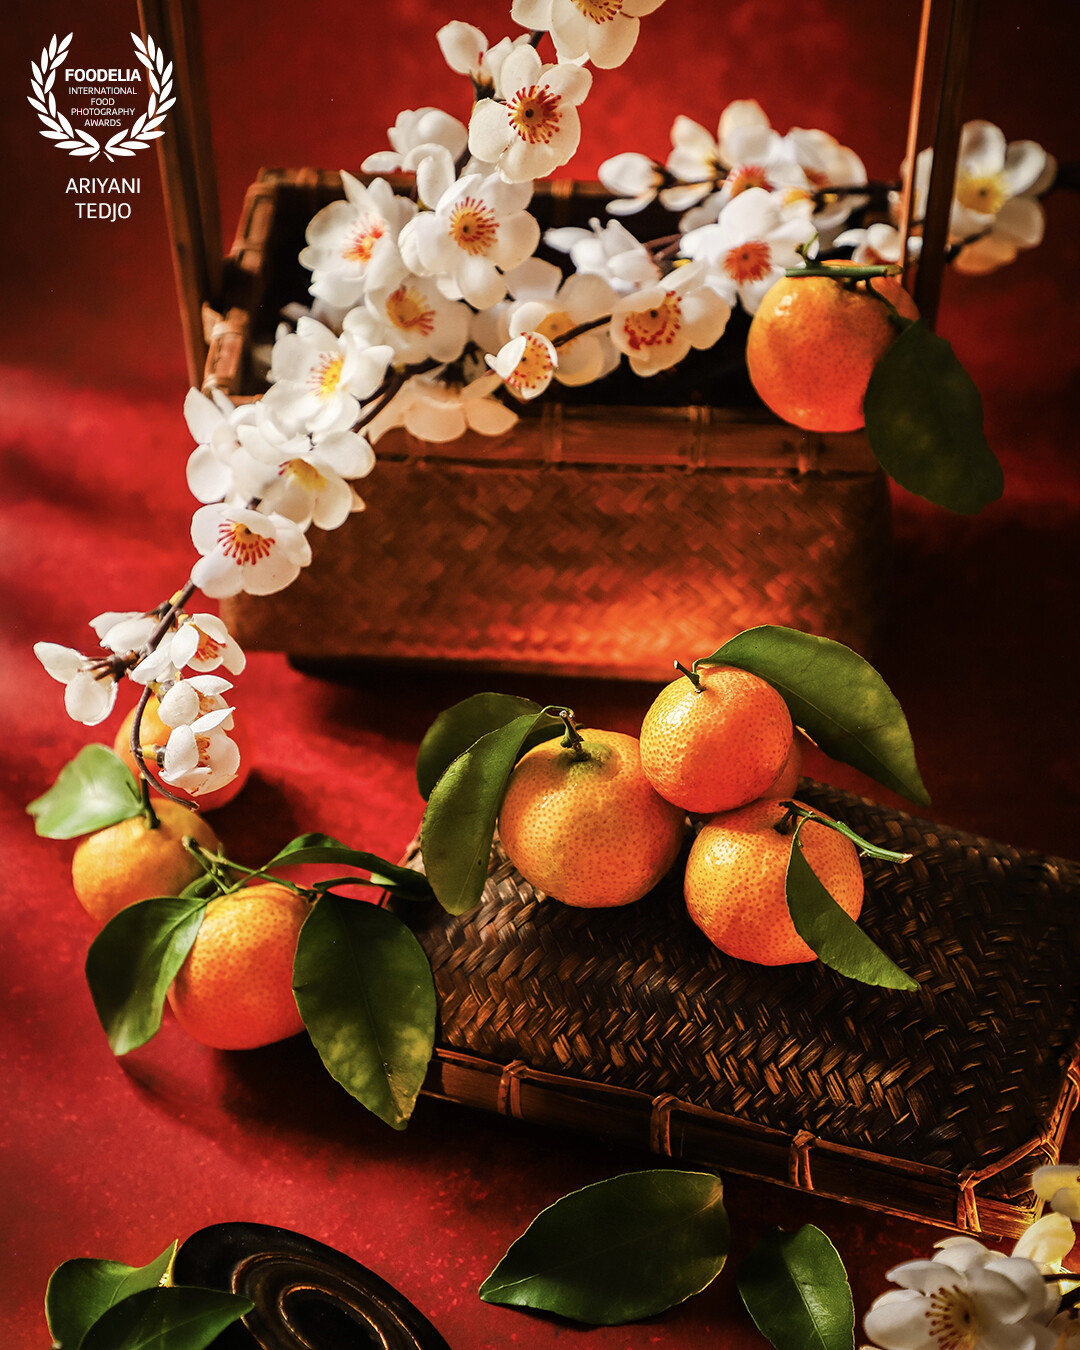 Mandarins for Lunar New Year. As this Chinese New Year is approaching, mandarin oranges are sure abundant as this citrus fruit is considered an auspicious food to have for this celebration.